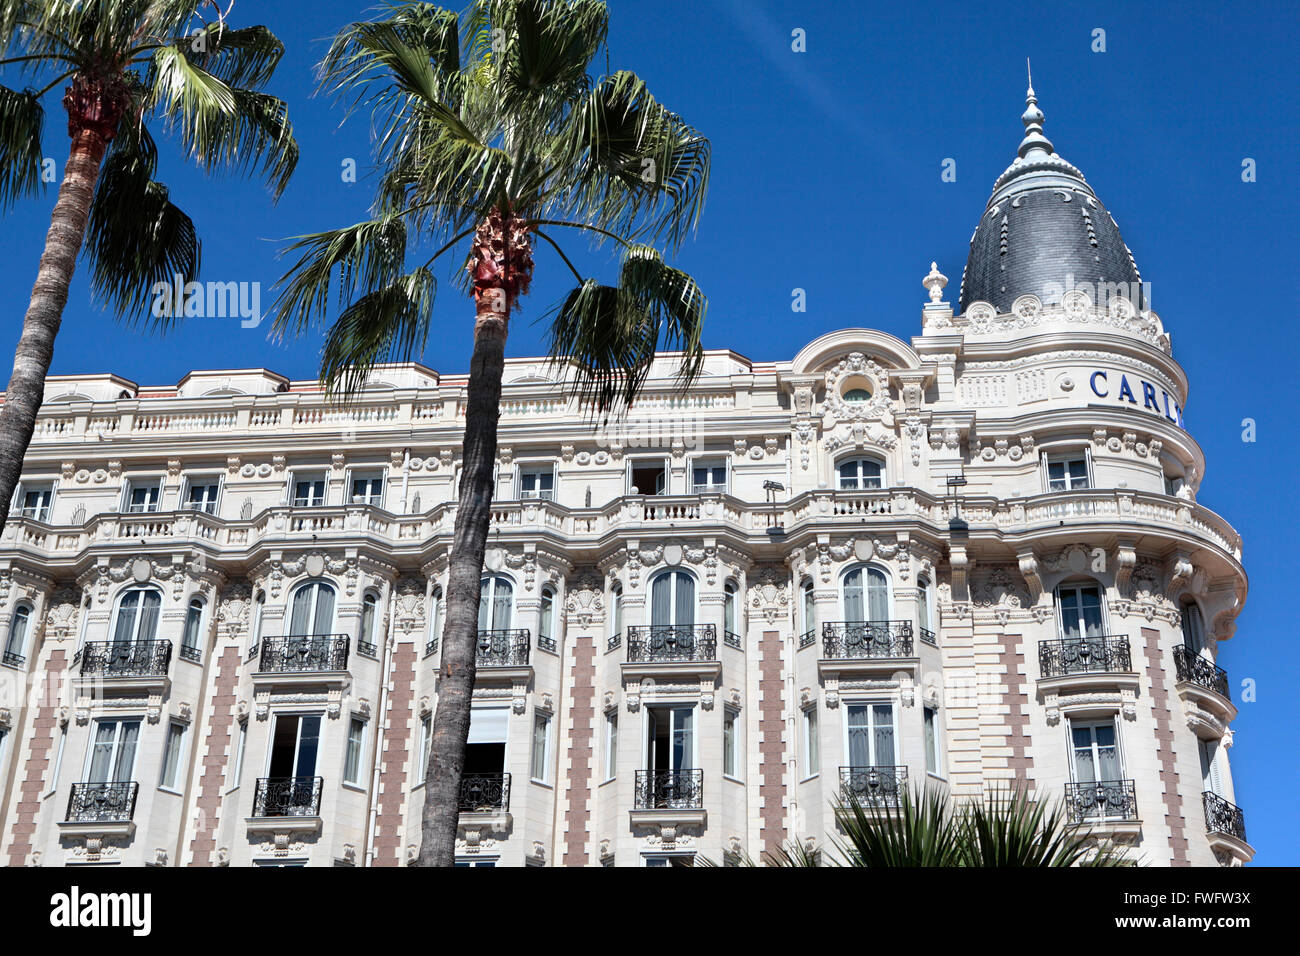 Front and corner view of the facade and dome of the famous Carlton International Hotel in Cannes Stock Photo